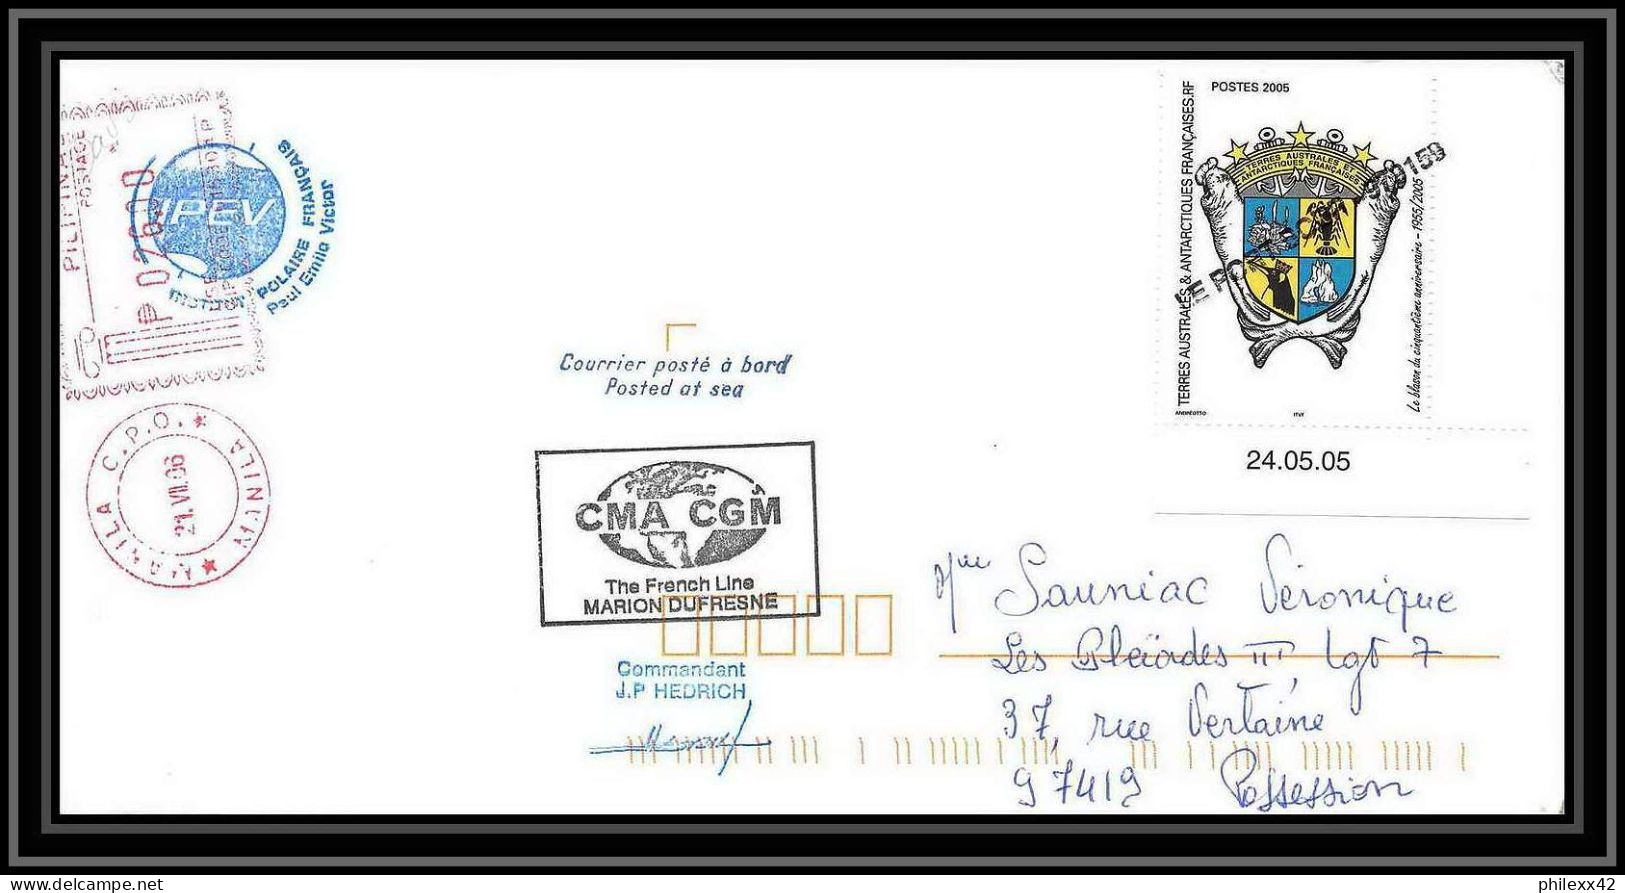 2590 ANTARCTIC Taaf Philippines Pilipinas Mixte Lettre Cover Dufresne 2 Signé Signed Md 155 Marco Polo 2 2006 - Antarctic Expeditions